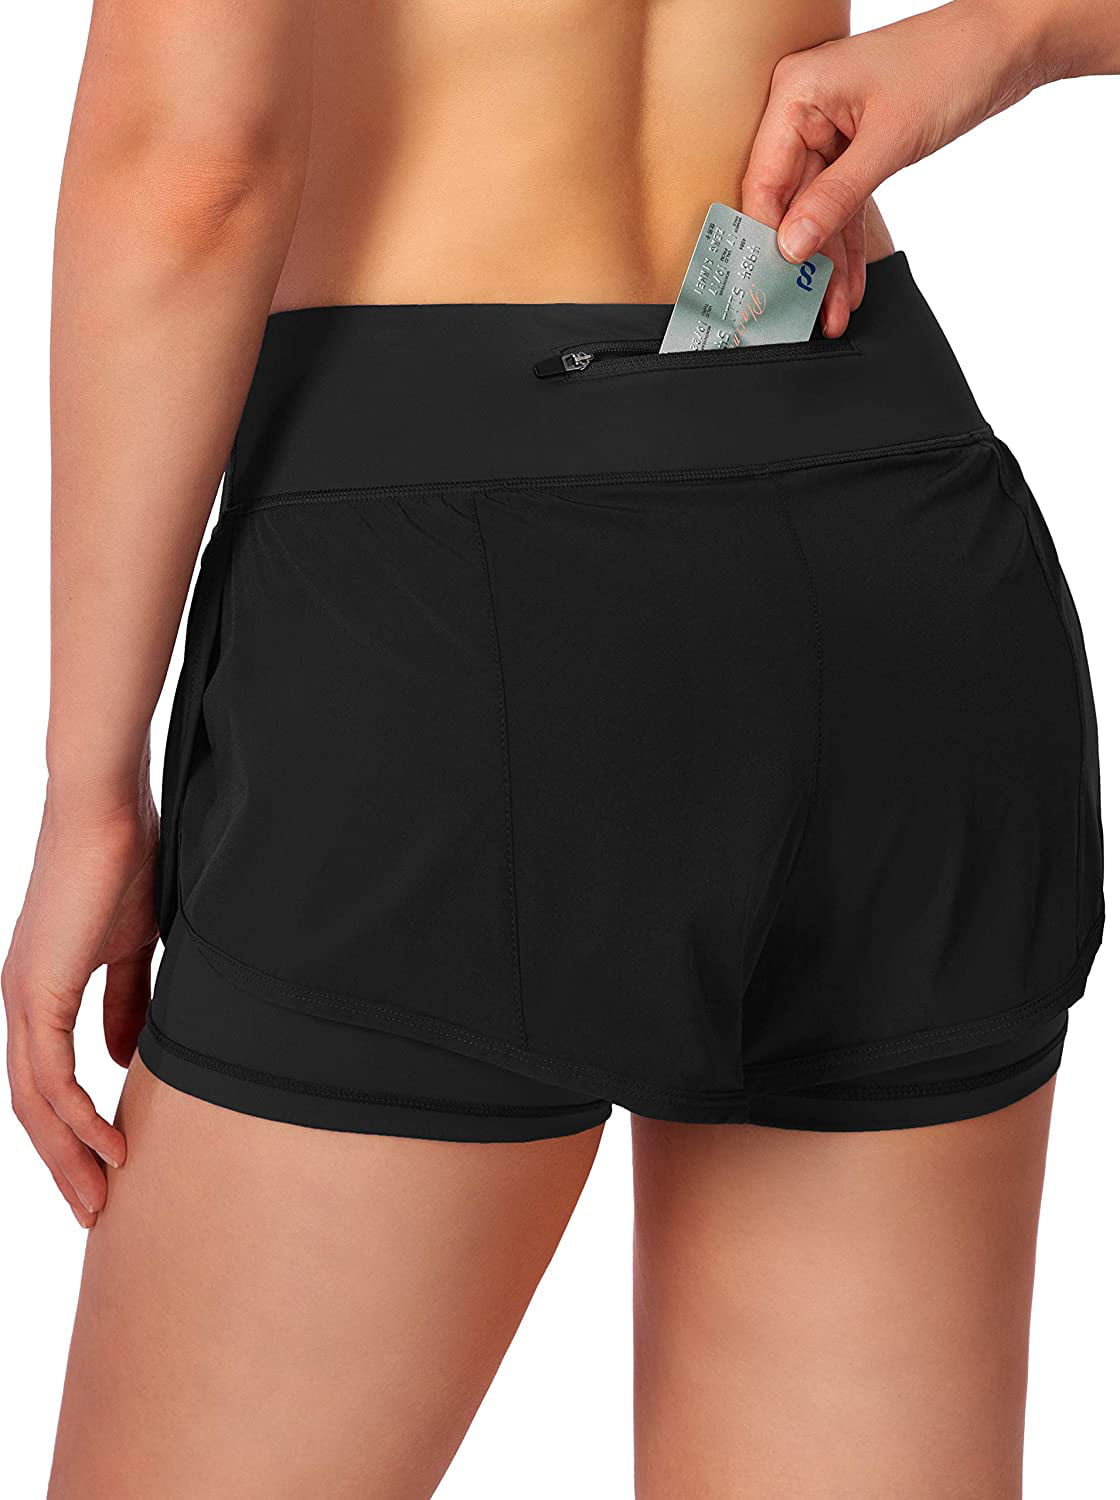 Women’s 2 in 1 Running Shorts Workout Athletic Gym Yoga Shorts for Women with Phone Pockets 